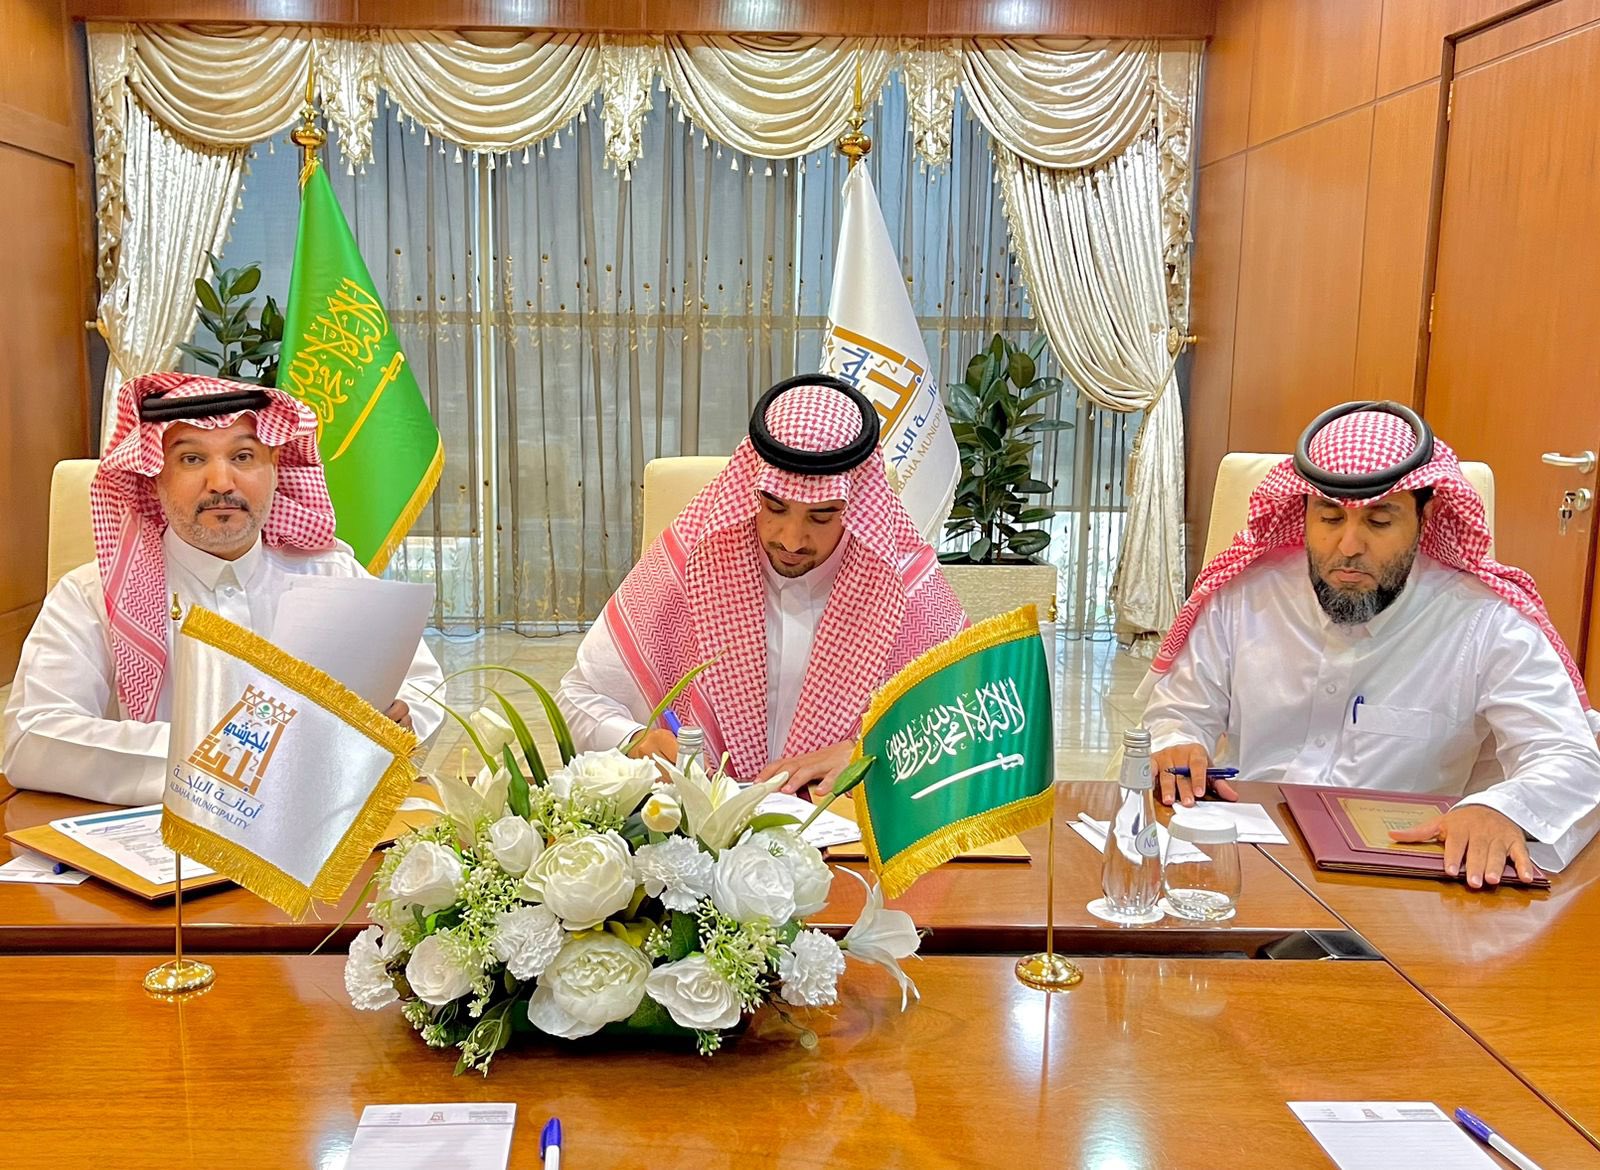 His Excellency the Mayor of Baljurashi, Mr. Muhammad bin Abdul Wahab Al-Suairi, signed a contract to establish and operate a residential commercial activity